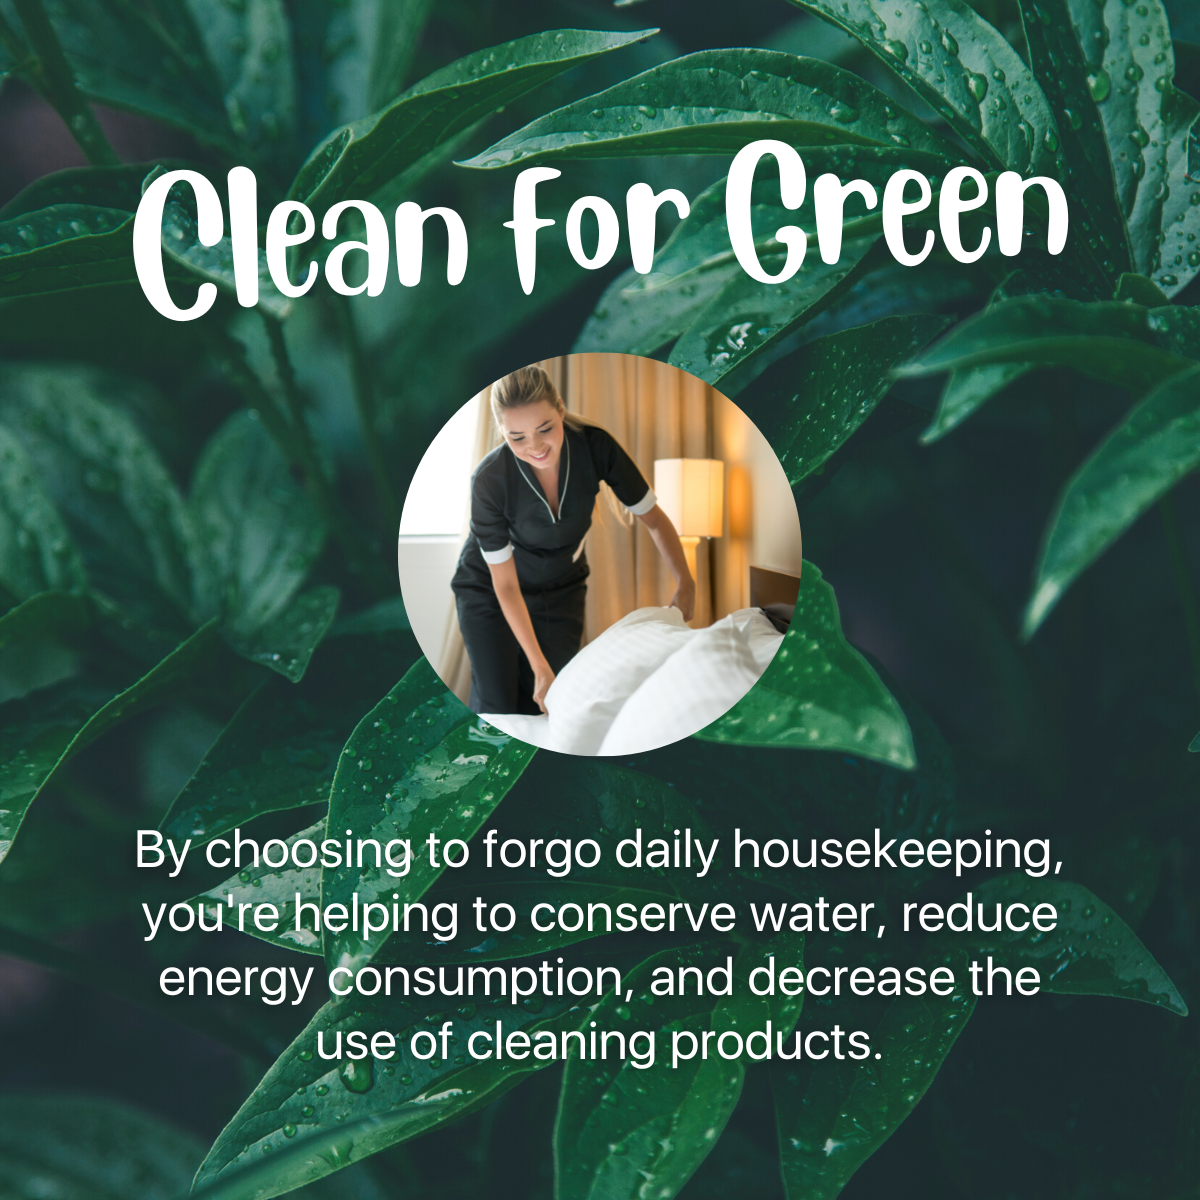 clean-for-green